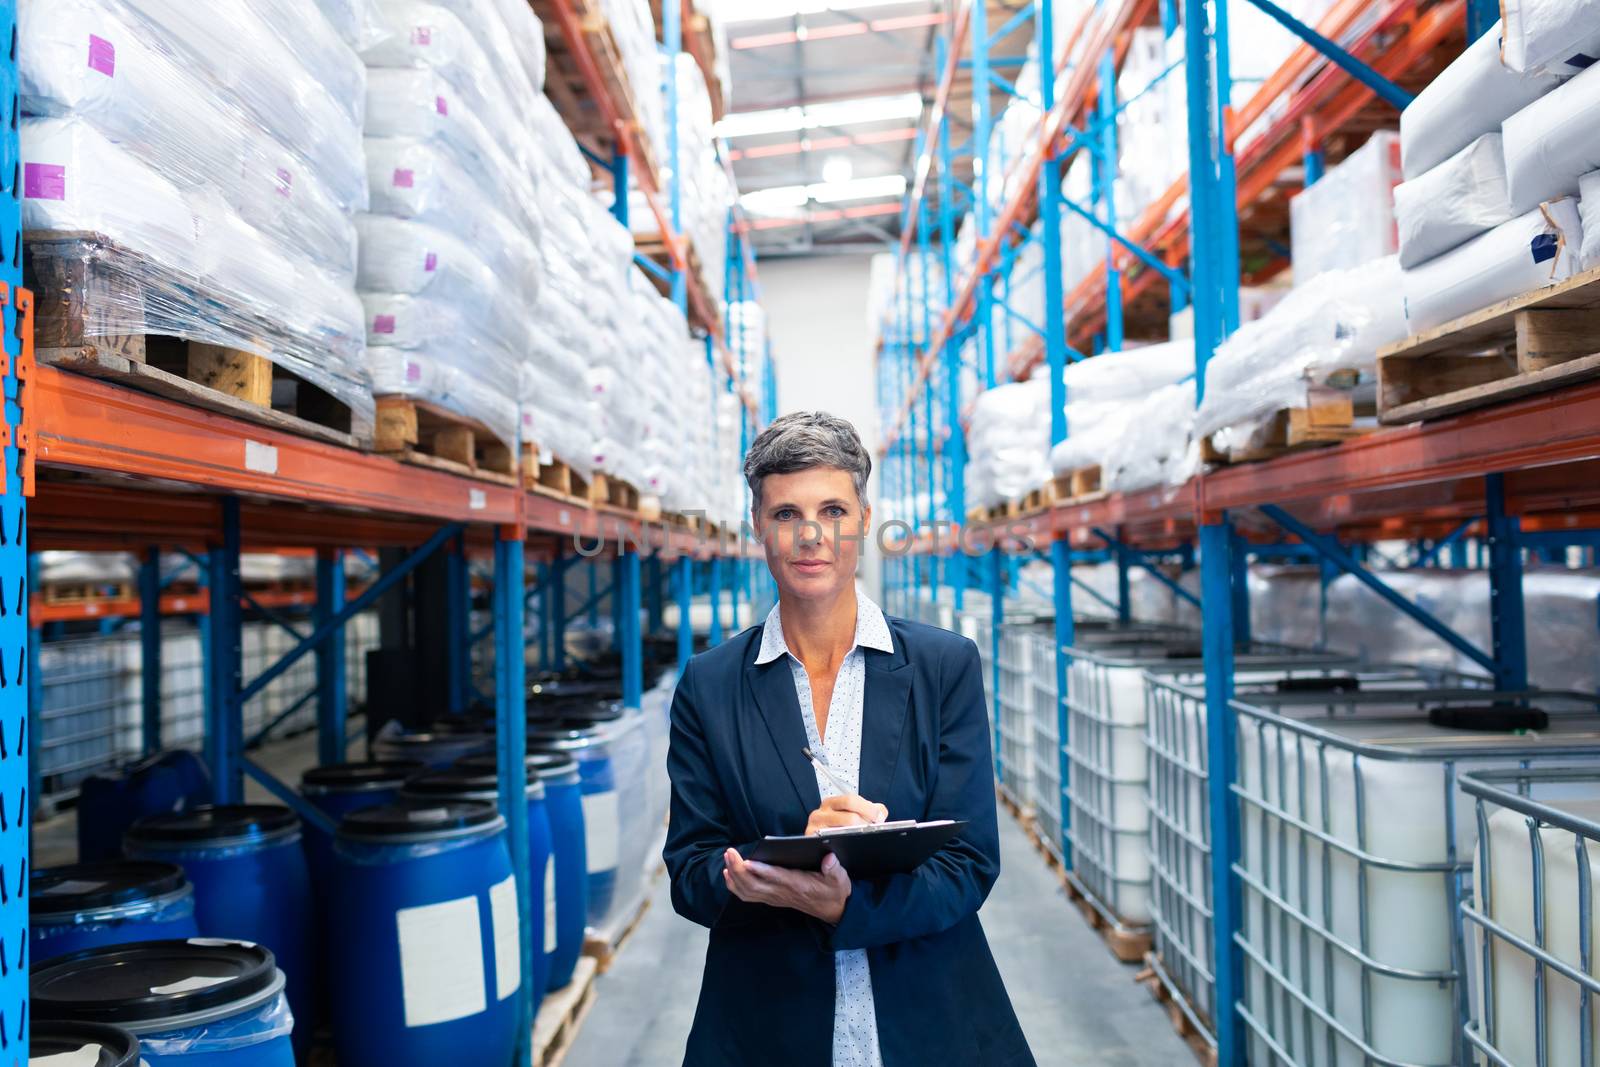 Portrait of beautiful mature Caucasian female manager looking at camera while writing on clipboard in warehouse. This is a freight transportation and distribution warehouse. Industrial and industrial workers concept